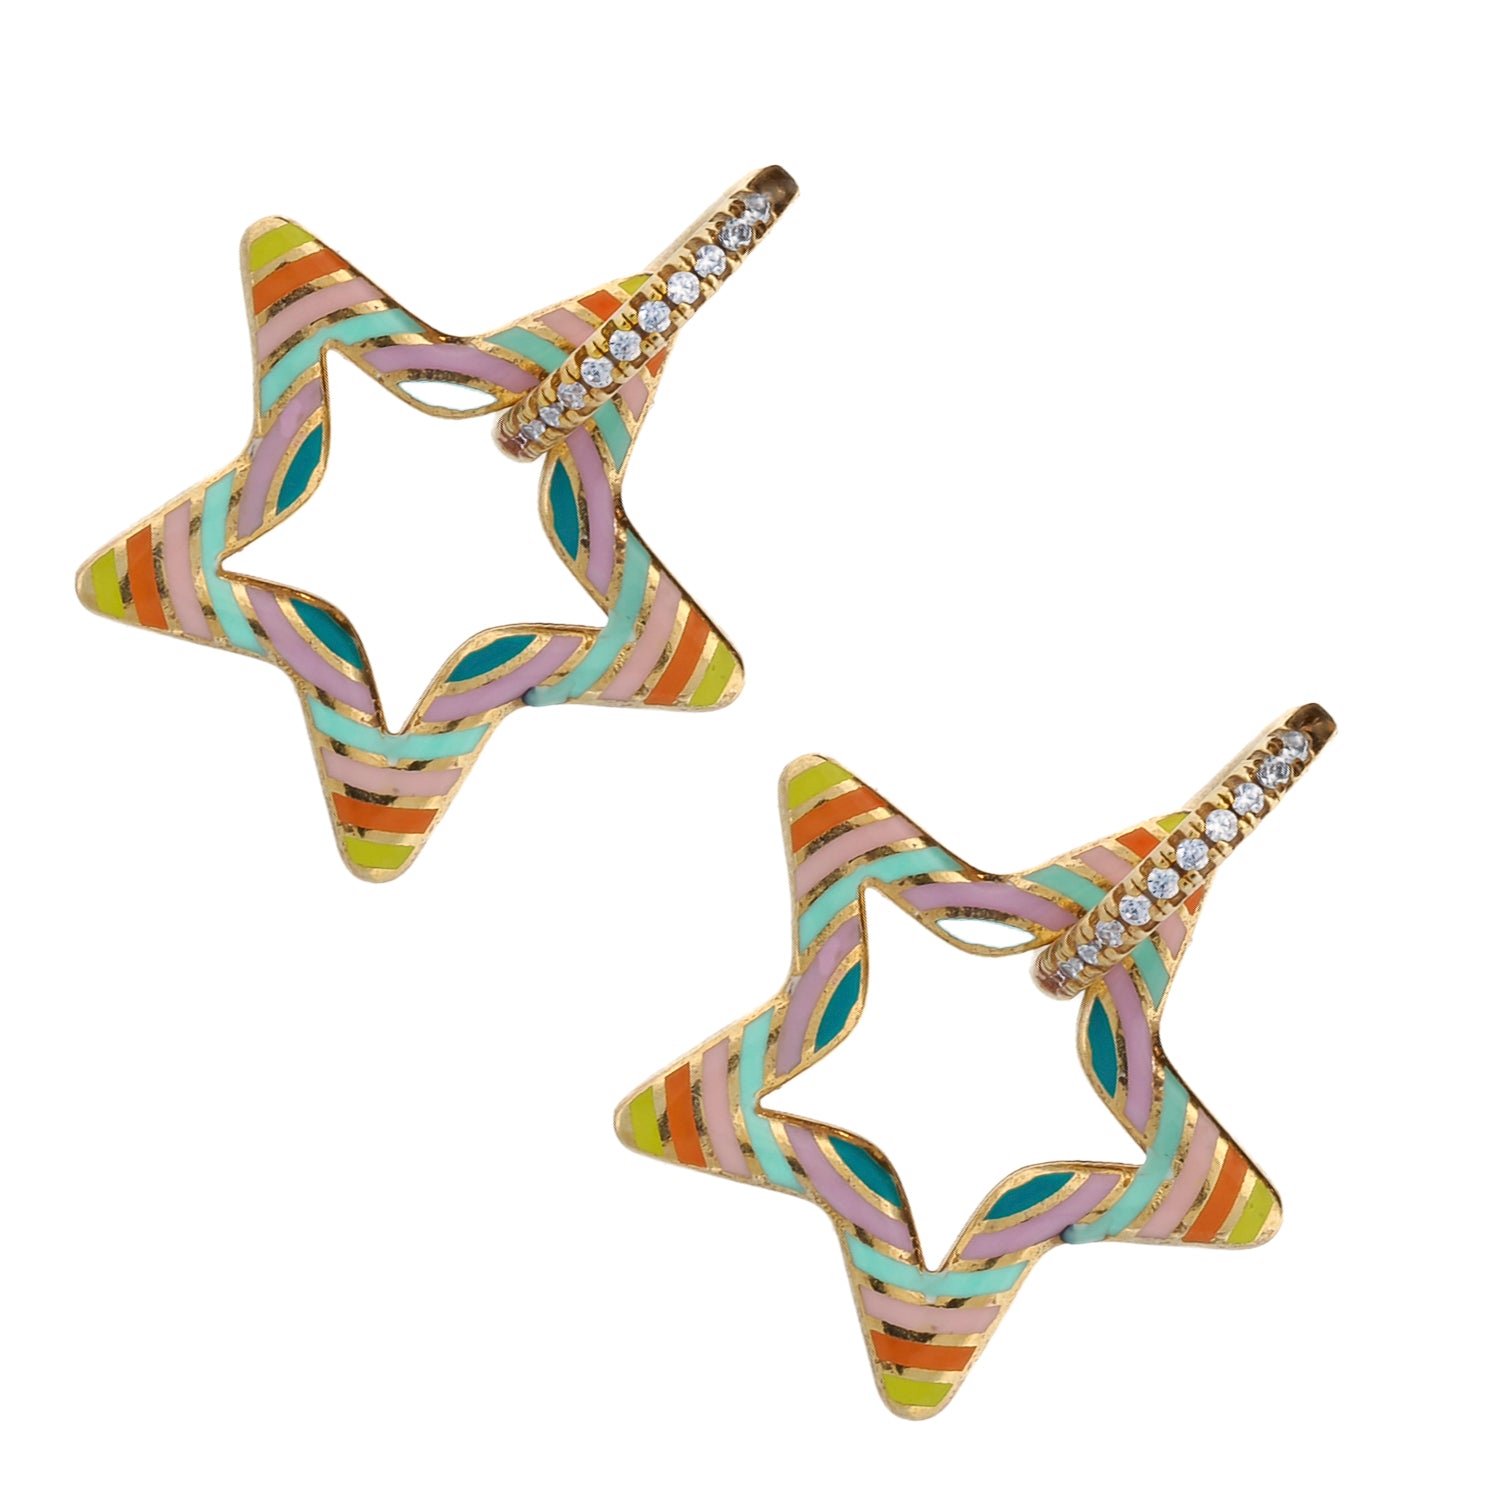 Fusion of hues: Sterling Silver Earrings with delicate Pastel Colors